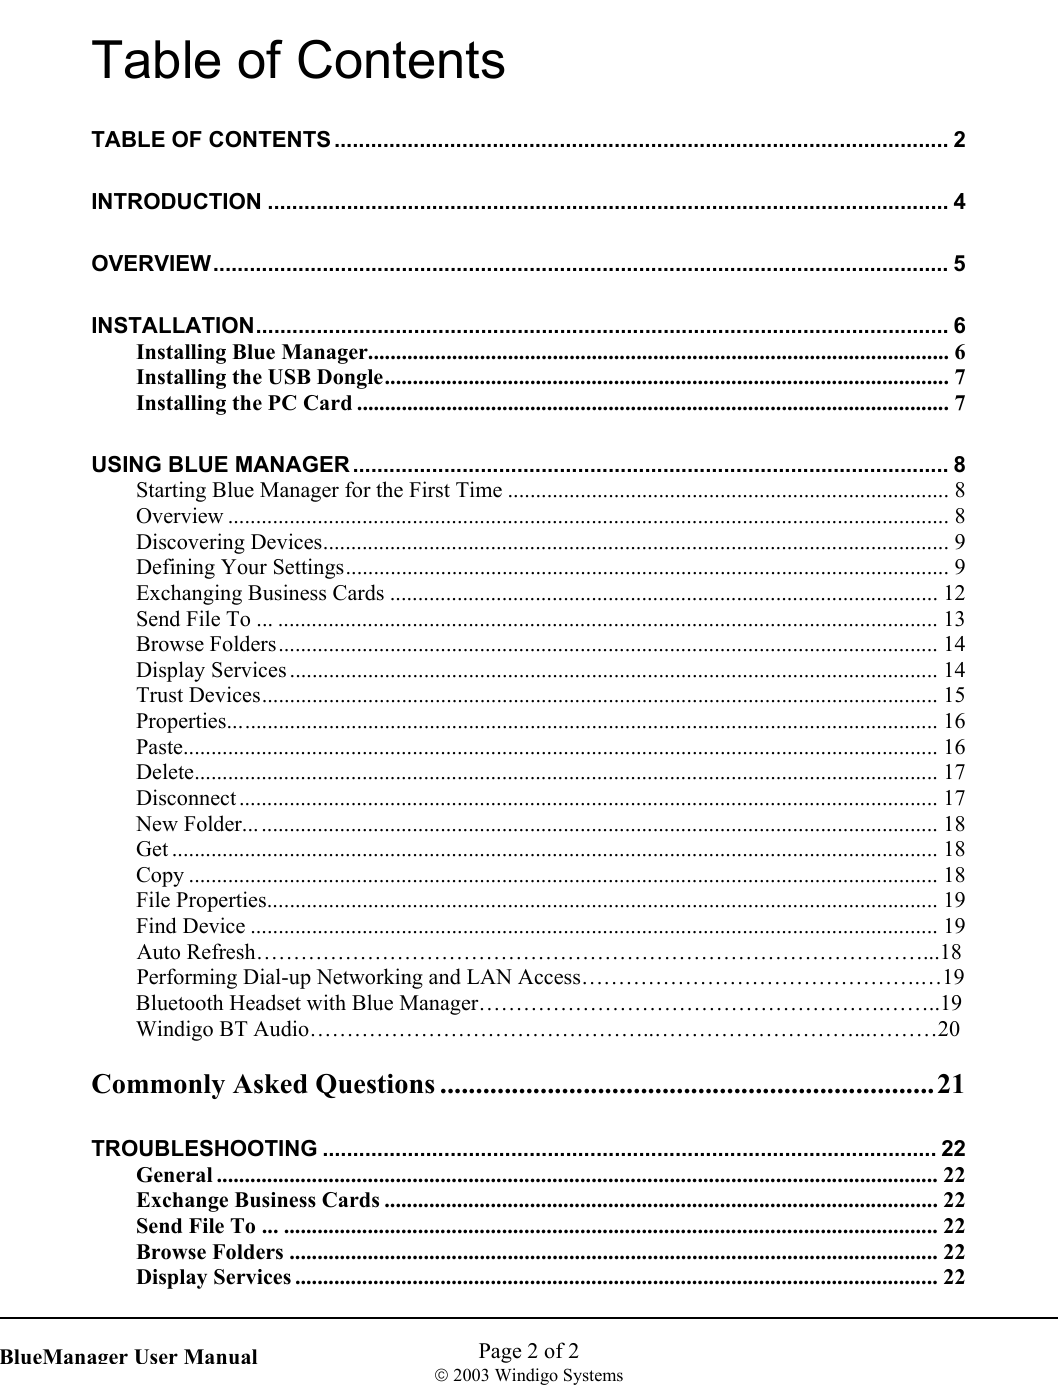    Page 2 of 2  2003 Windigo Systems   BlueManager User ManualTable of Contents TABLE OF CONTENTS ..................................................................................................... 2 INTRODUCTION ................................................................................................................ 4 OVERVIEW......................................................................................................................... 5 INSTALLATION.................................................................................................................. 6 Installing Blue Manager........................................................................................................ 6 Installing the USB Dongle..................................................................................................... 7 Installing the PC Card ..........................................................................................................7 USING BLUE MANAGER .................................................................................................. 8 Starting Blue Manager for the First Time ............................................................................... 8 Overview ................................................................................................................................. 8 Discovering Devices................................................................................................................ 9 Defining Your Settings............................................................................................................ 9 Exchanging Business Cards .................................................................................................. 12 Send File To ... ...................................................................................................................... 13 Browse Folders...................................................................................................................... 14 Display Services .................................................................................................................... 14 Trust Devices......................................................................................................................... 15 Properties............................................................................................................................... 16 Paste....................................................................................................................................... 16 Delete..................................................................................................................................... 17 Disconnect ............................................................................................................................. 17 New Folder............................................................................................................................ 18 Get ......................................................................................................................................... 18 Copy ...................................................................................................................................... 18 File Properties........................................................................................................................ 19 Find Device ........................................................................................................................... 19  Auto Refresh………………………………………………………………………………...18   Performing Dial-up Networking and LAN Access……………………………………….…19 Bluetooth Headset with Blue Manager……………………………………………….……..19 Windigo BT Audio………………………………………..………………………...………20  Commonly Asked Questions .....................................................................21 TROUBLESHOOTING ..................................................................................................... 22 General ................................................................................................................................. 22 Exchange Business Cards ................................................................................................... 22 Send File To ... ..................................................................................................................... 22 Browse Folders .................................................................................................................... 22 Display Services ................................................................................................................... 22 